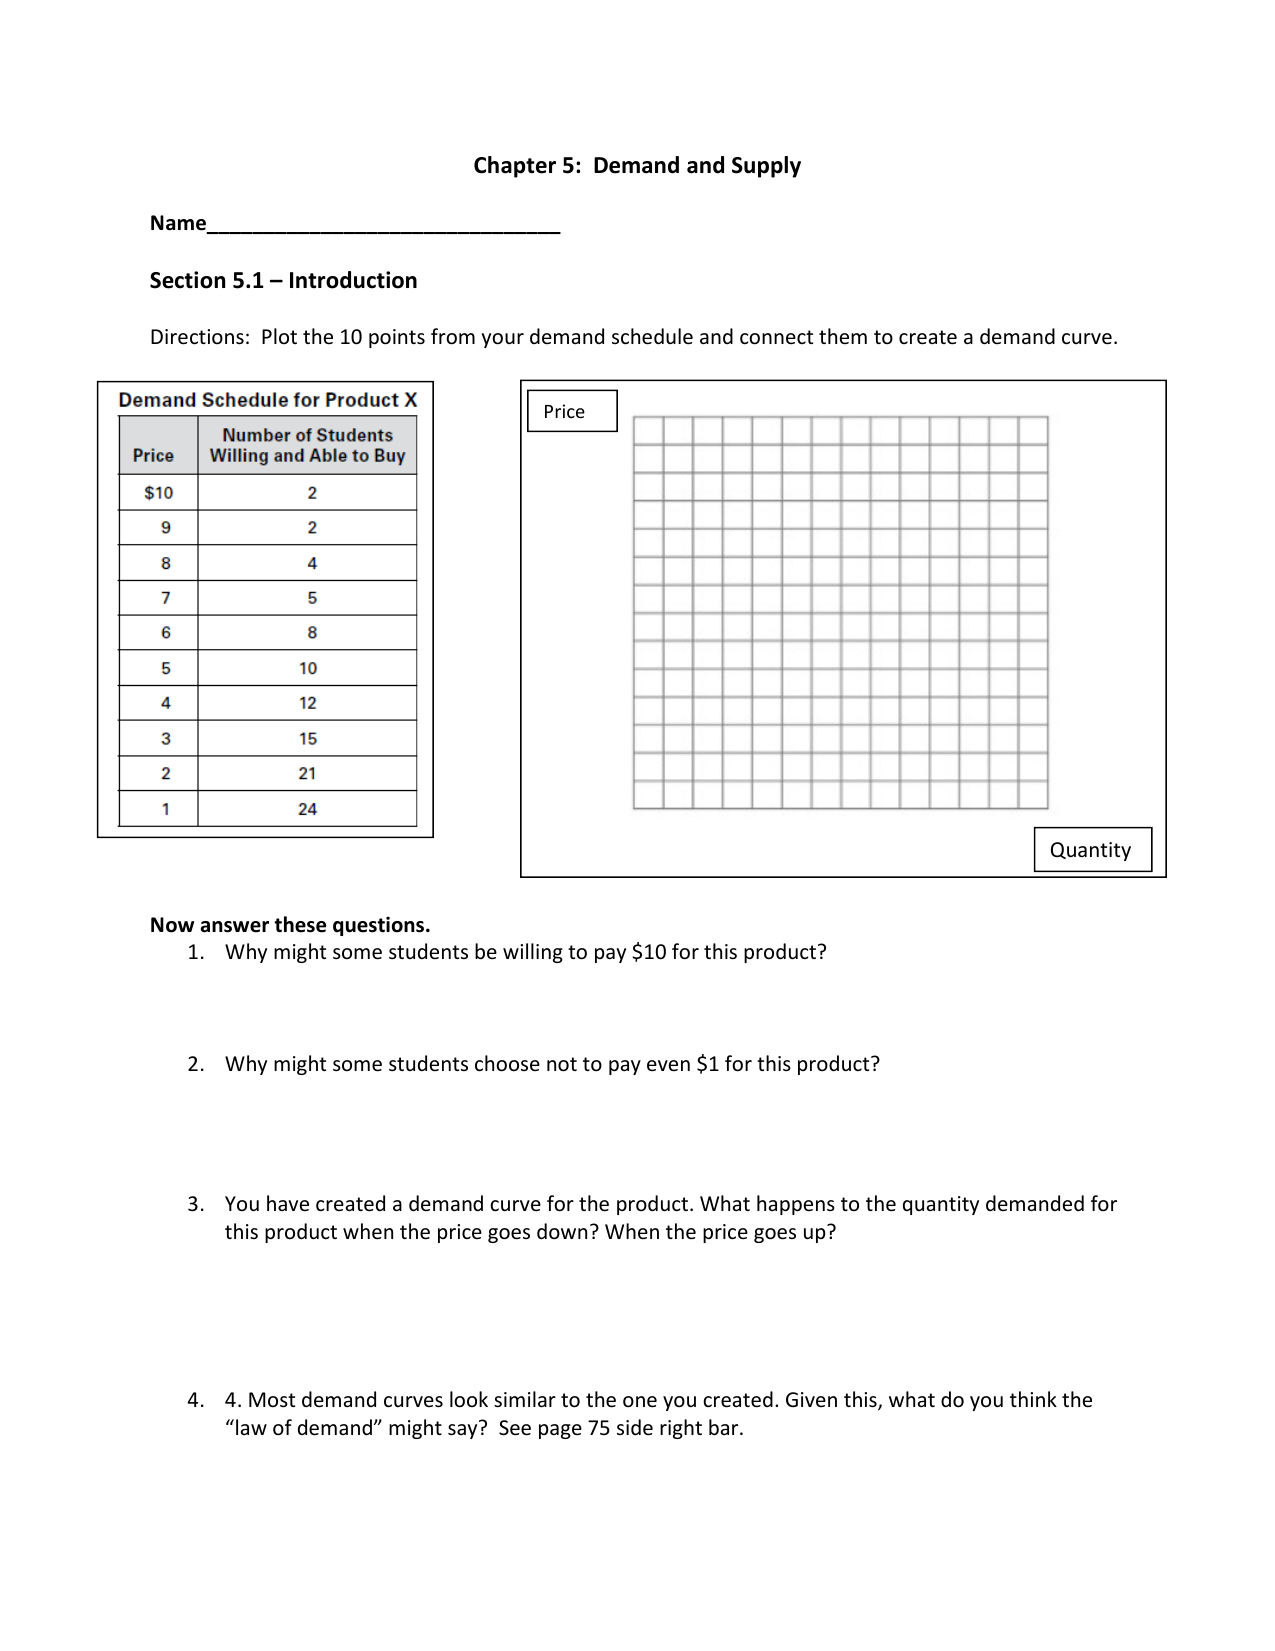 Chapter 5 Demand And Supply Section 51 – Introduction In Chapter 5 Section 1 Understanding Supply Worksheet Answers